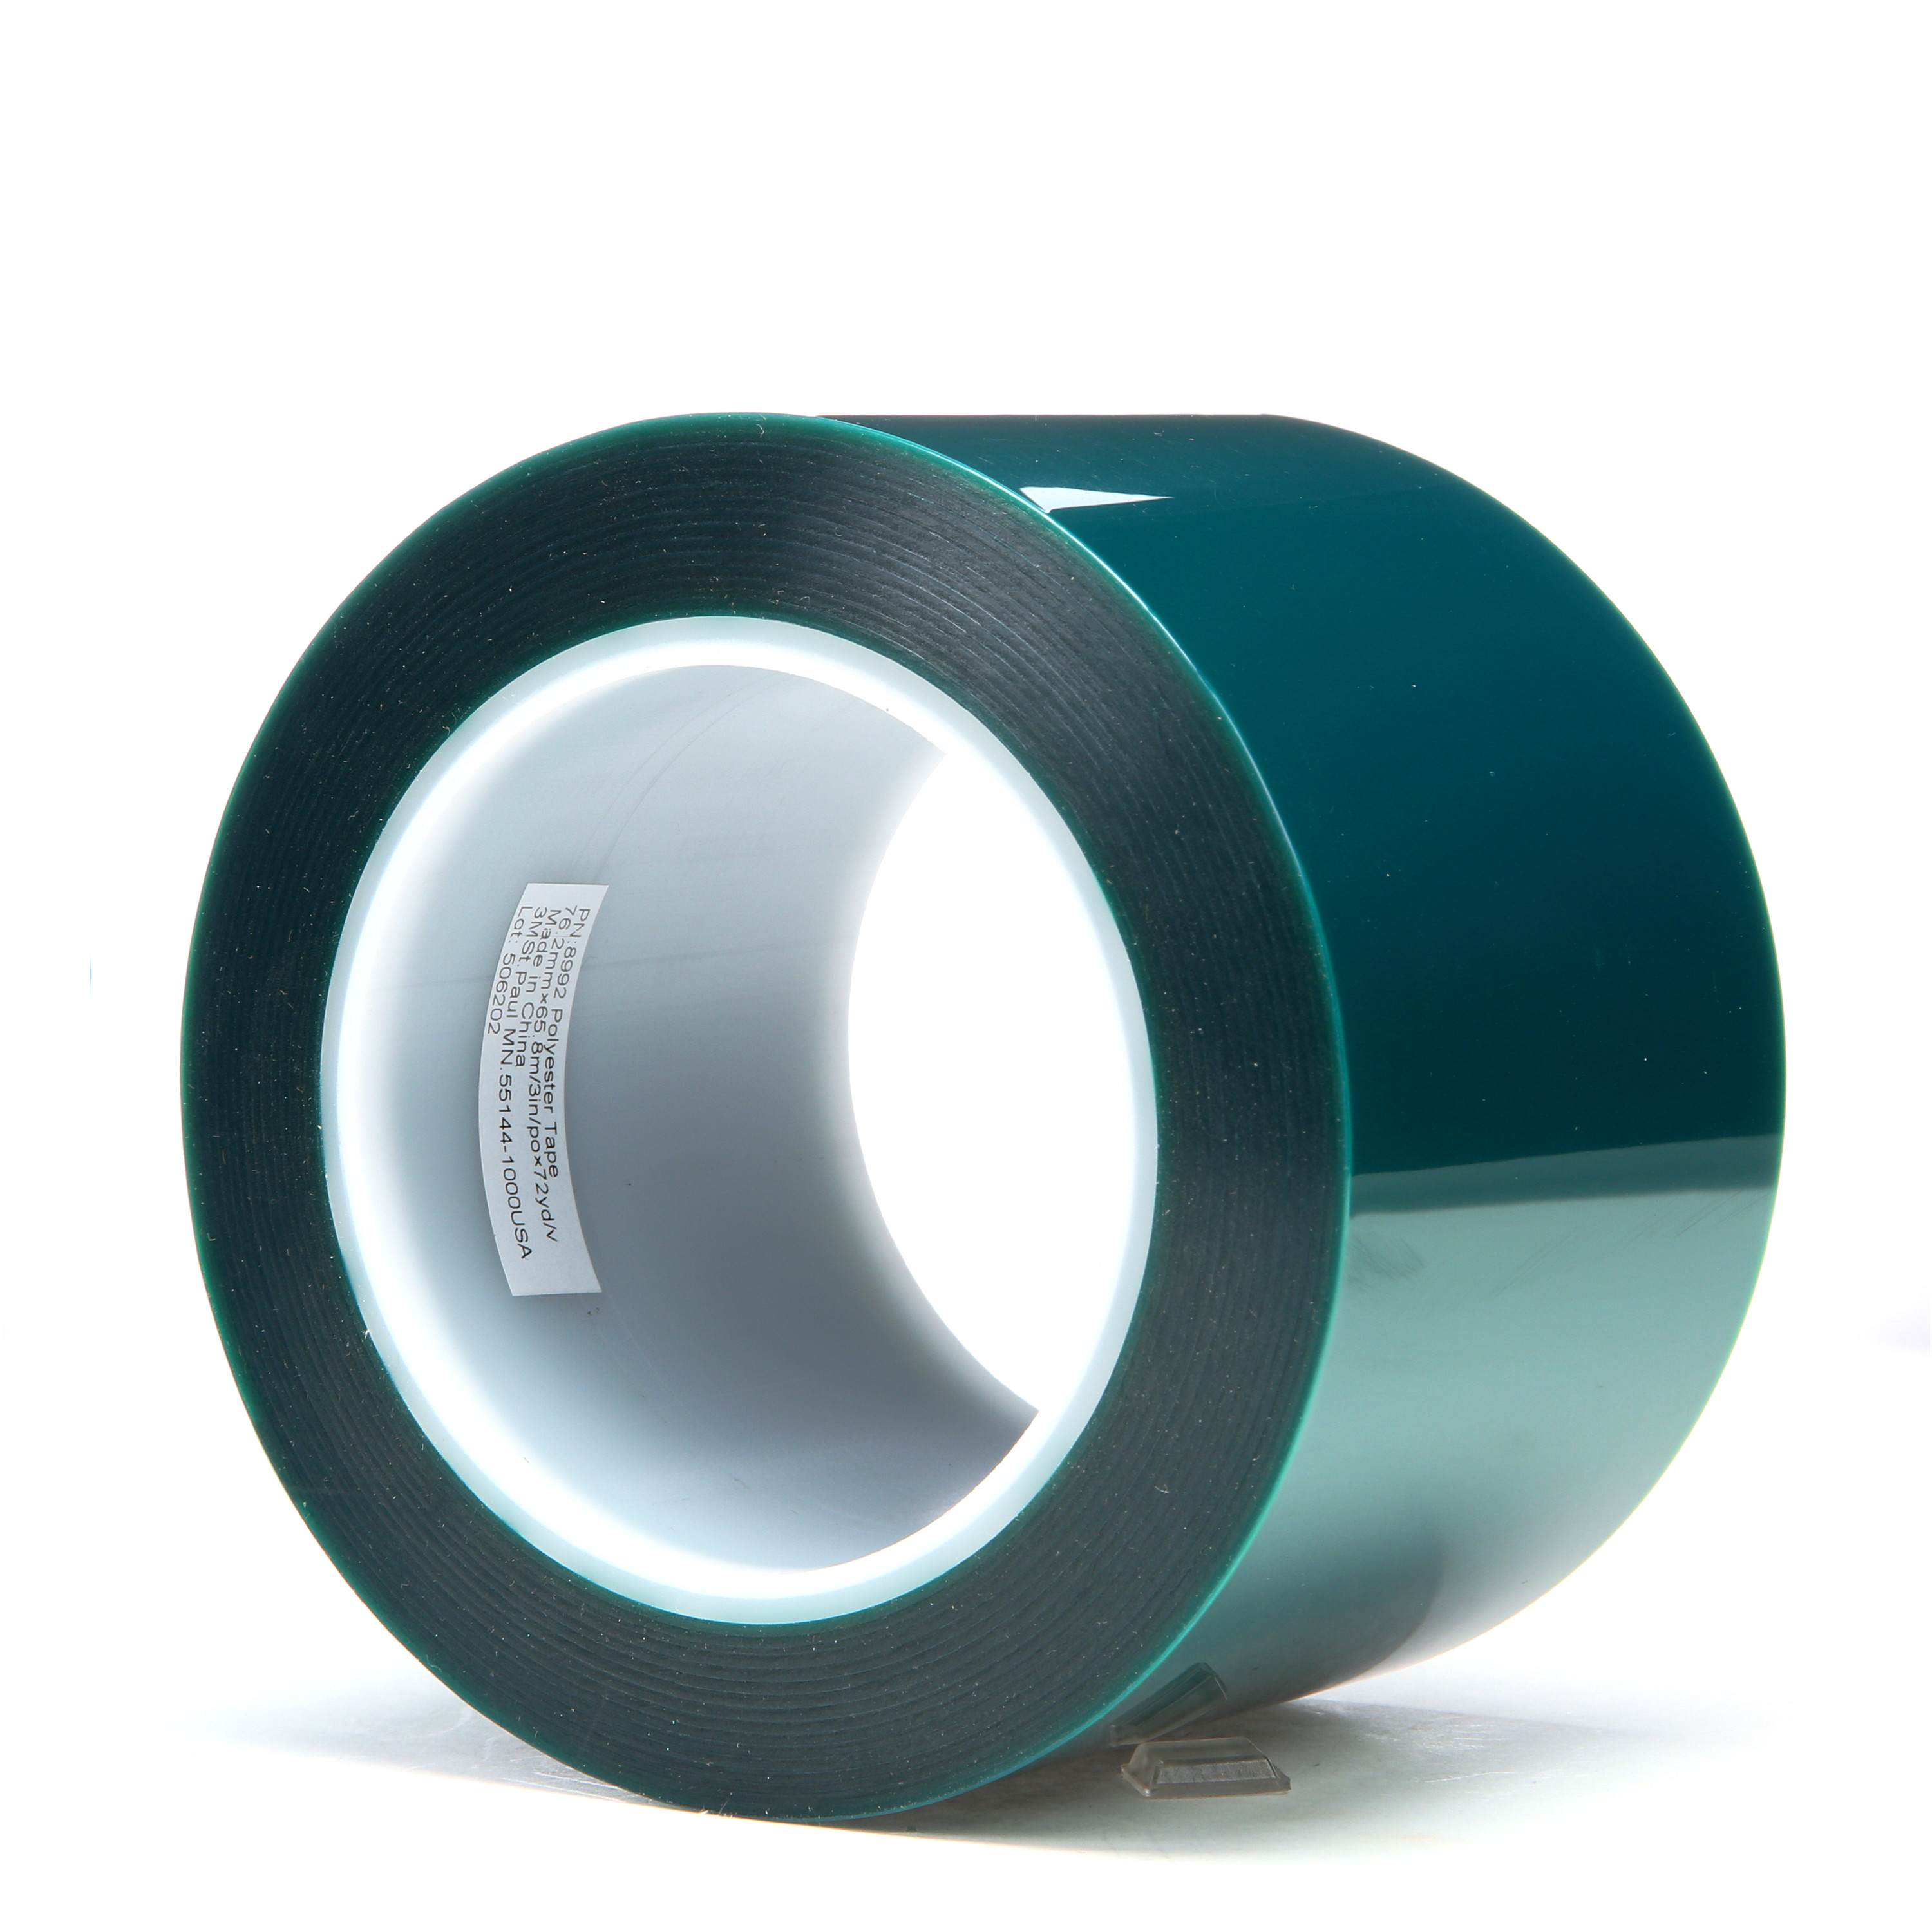 3M™ Polyester Tape 8992, Green, 3 in x 72 yd, 3.2 mil, 12 rolls per case